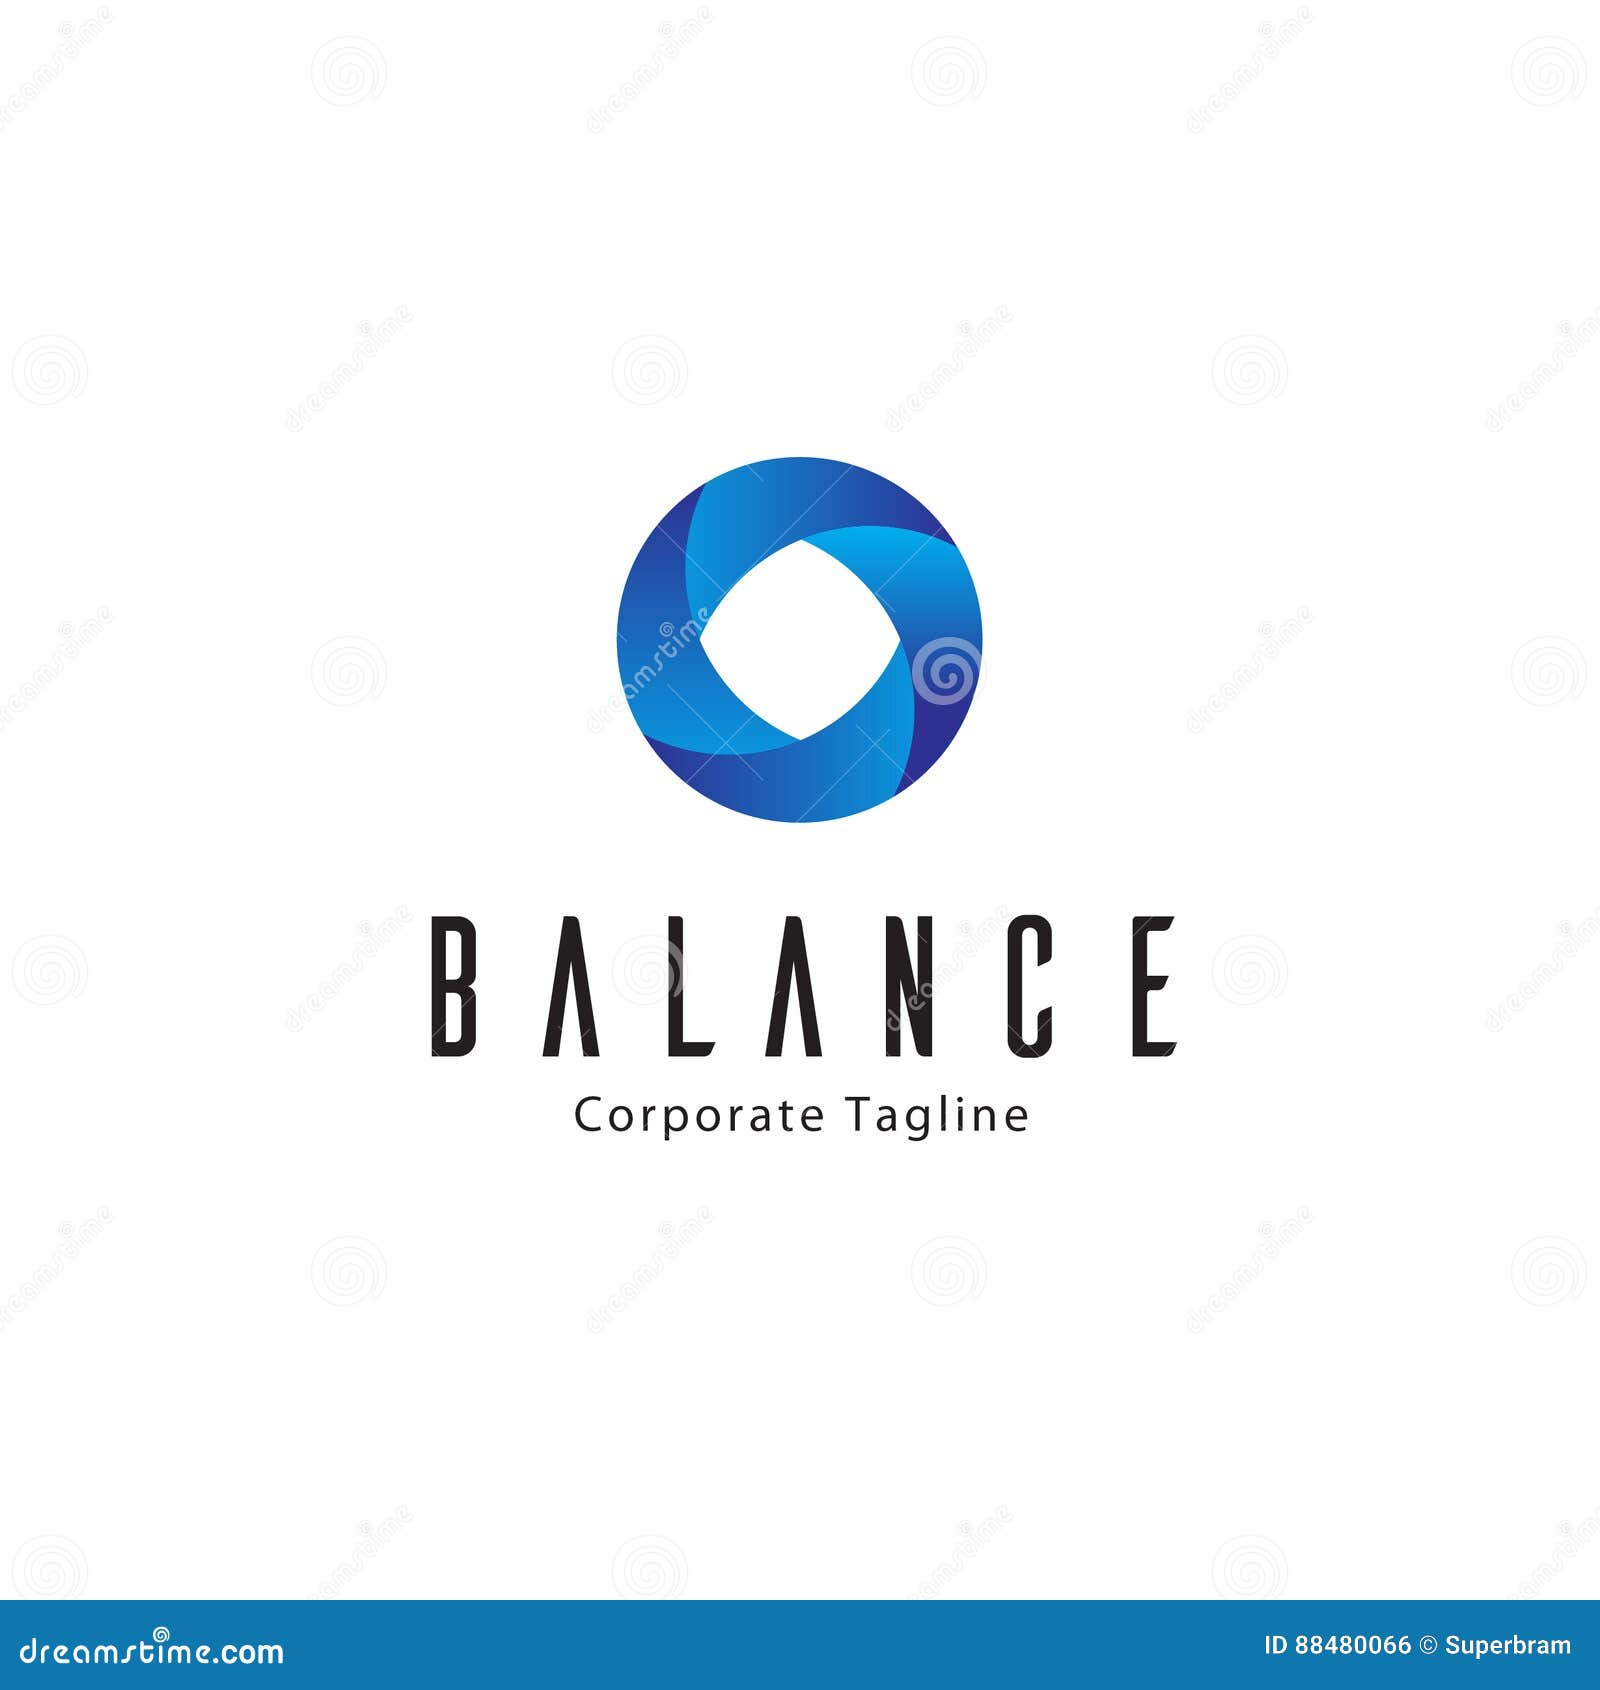 Balance Logo Template stock vector. Illustration of consultant - 88480066